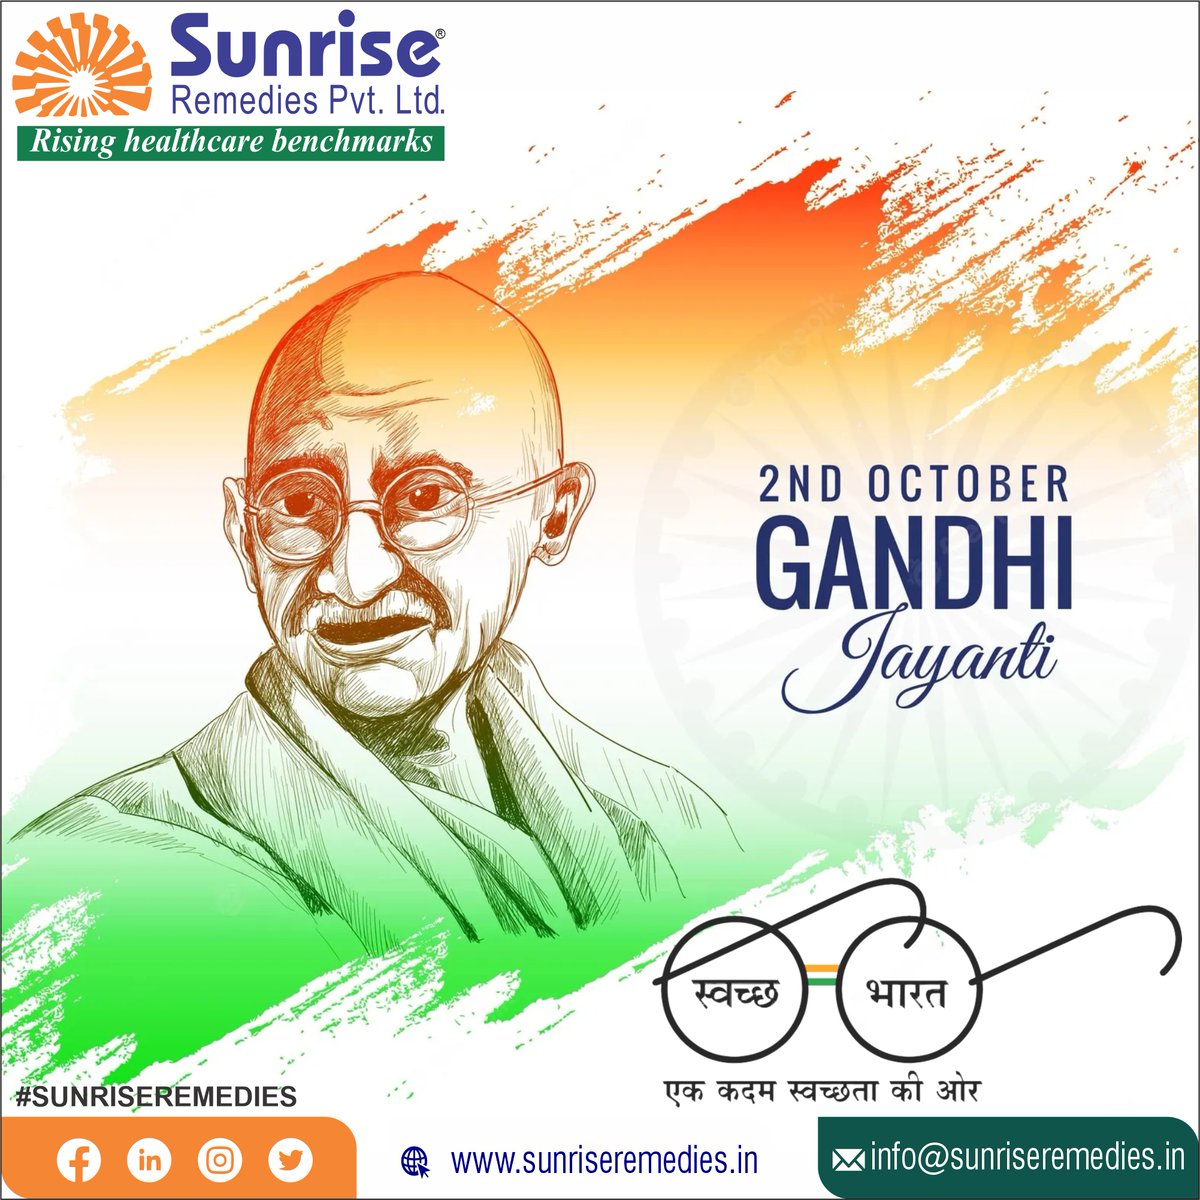 “Peace is the most powerful weapon of mankind”
Sunrise Remedies wishes everyone a Happy Gandhi Jayanti!
 
Our Site: sunriseremedies.in

#GandhiJayanti #PharmaceuticalCompany #PharmaManufacturers #NutraceuticalsProducts #AyurvedicProducts #Healthcare #PharmaExporter #Sunrise